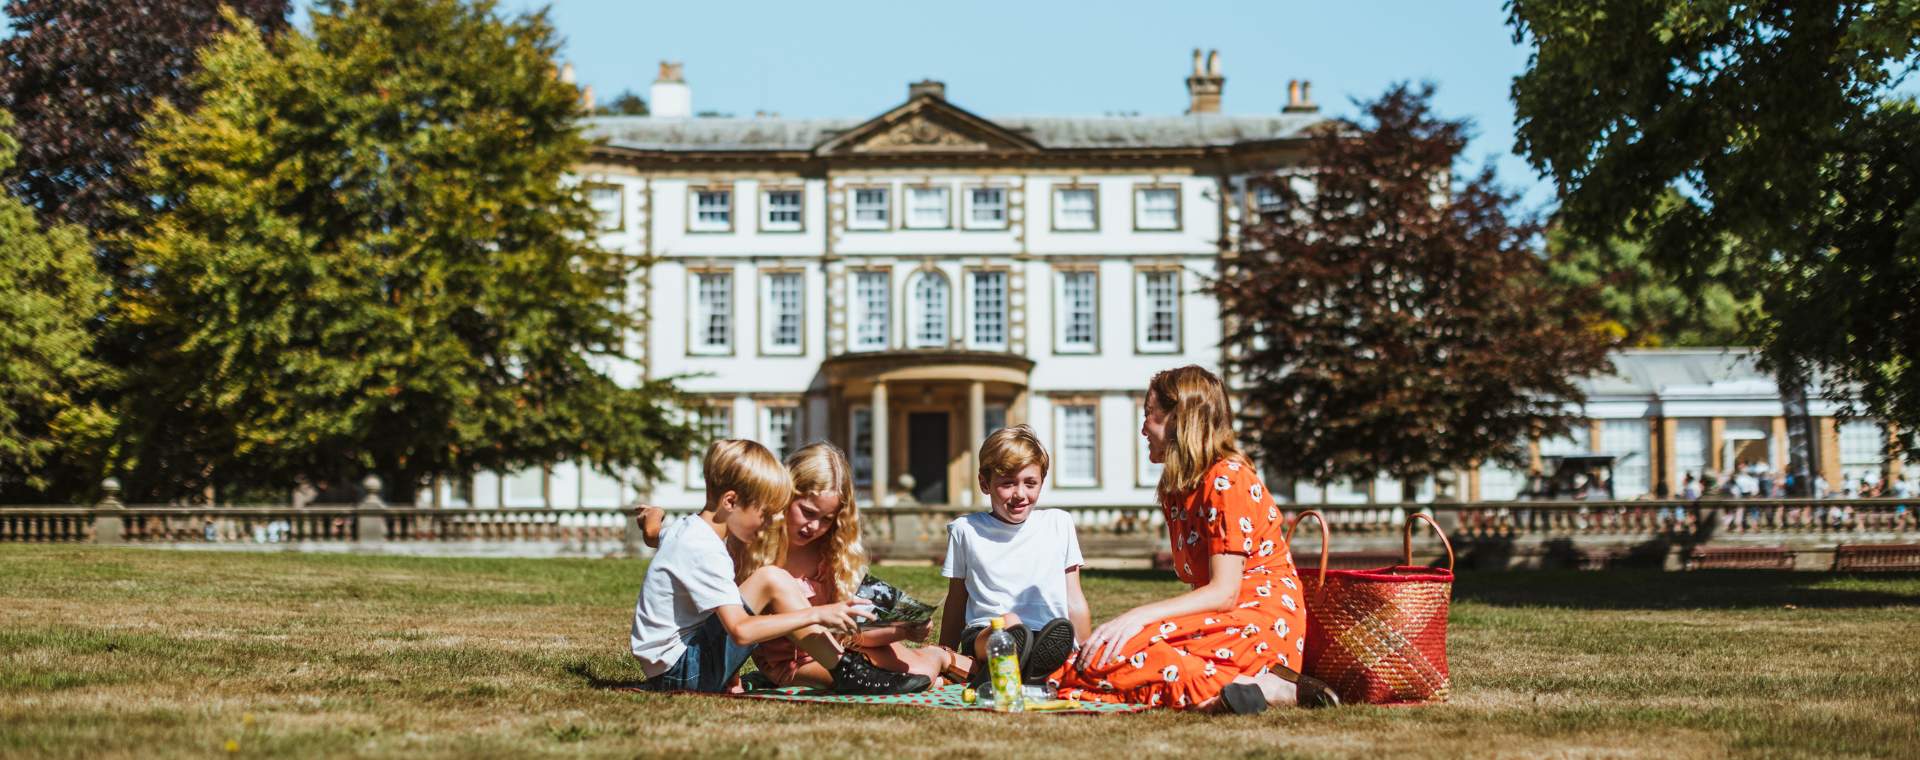 A mother and her three children enjoying a picnic on the grass in front of Sewerby Hall in Bridlington, East Yorkshire